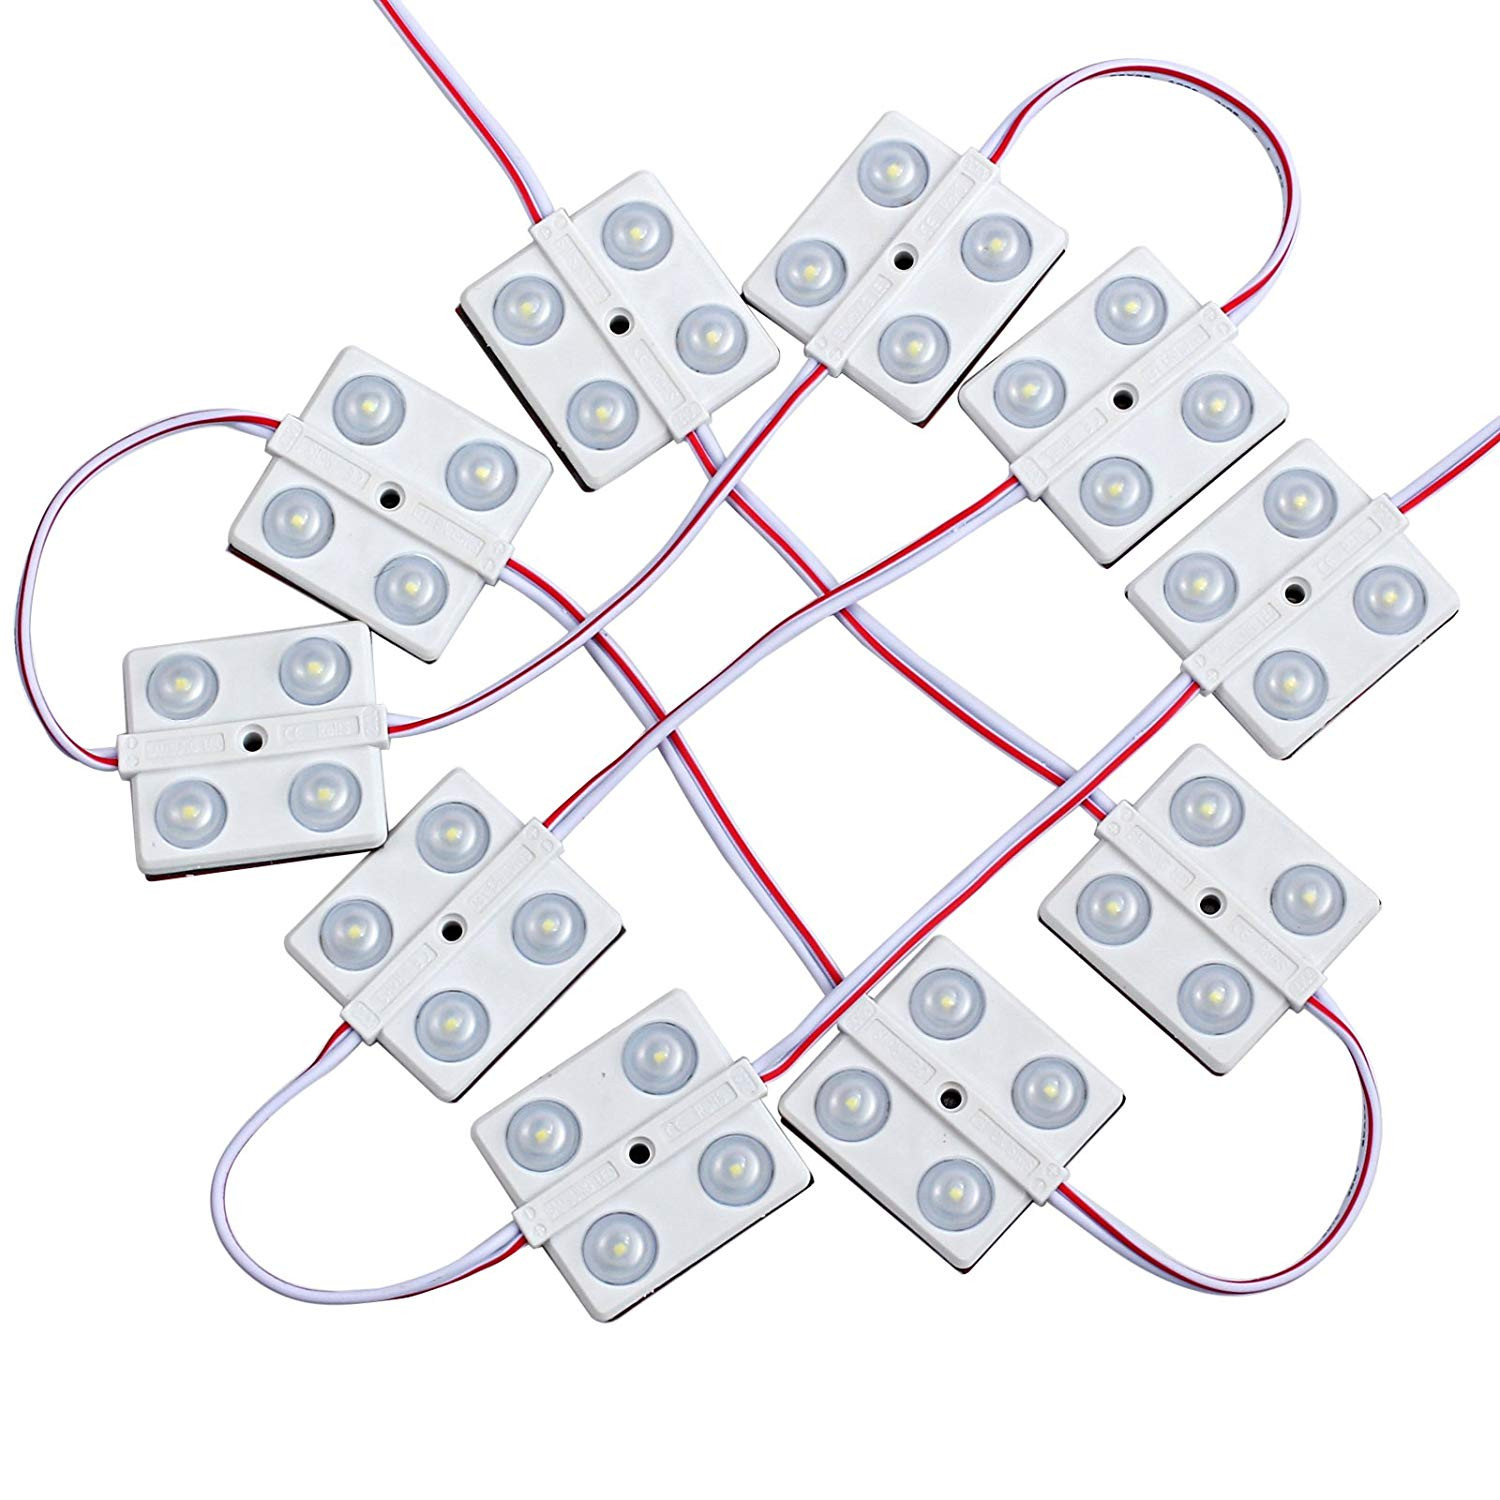 20pcs/pack LED Modules with SMD5730 4 LED DC12V 130-150LM 2W 160° Beam Waterproof IP67 with Adhesive Tape Back